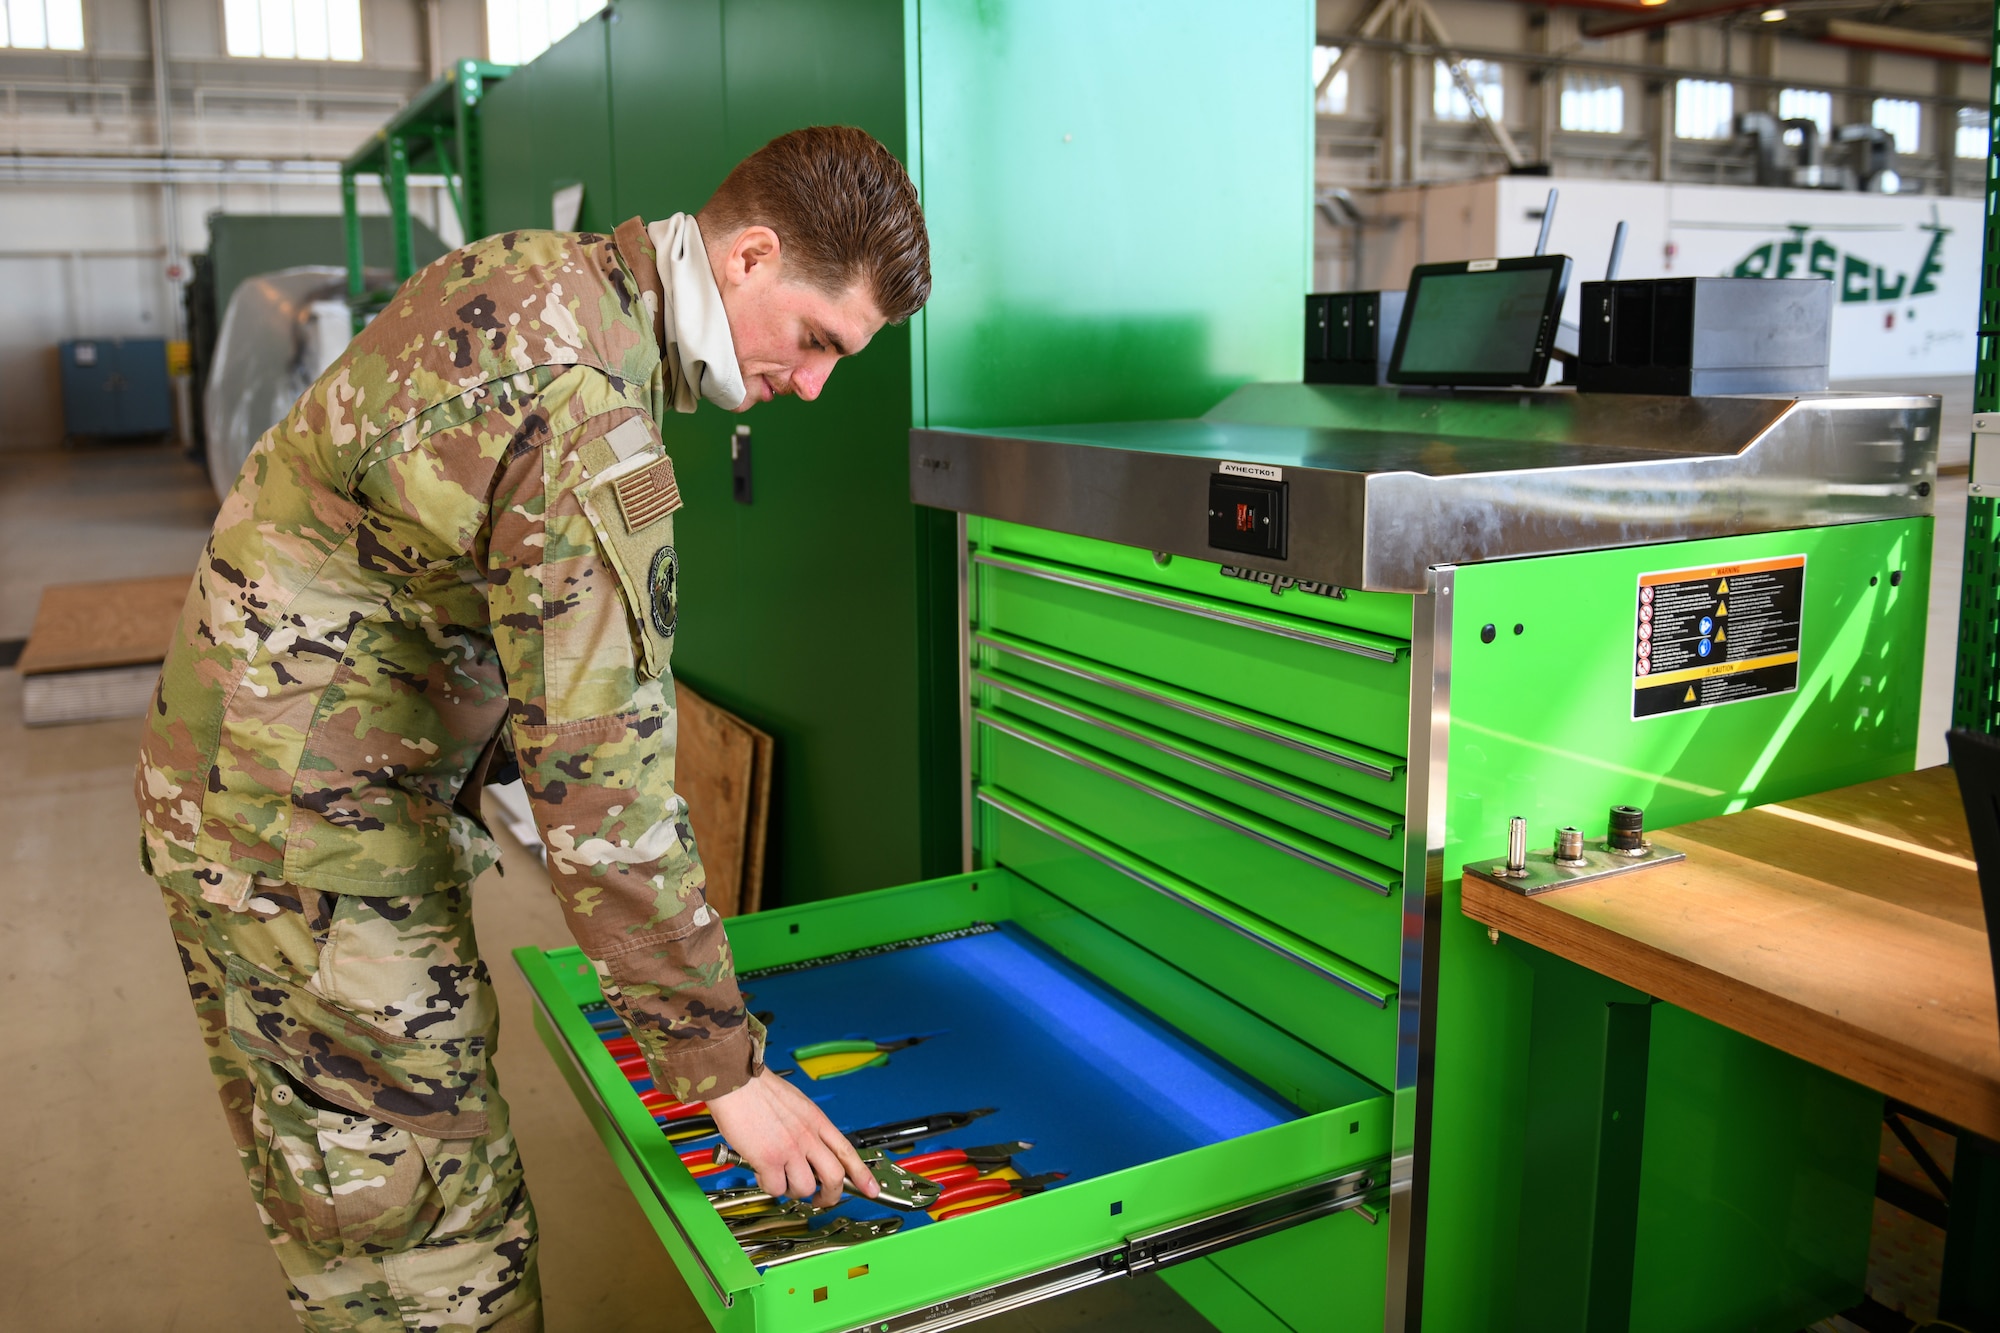 U.S. Air Force Staff Sgt. Edward T. Sims, 31st Aircraft Maintenance Squadron, 56th Helicopter Maintenance Unit support craftsman, opens an automated tool control system at Aviano Air Base, Italy, July 14, 2020. The 56th HMU renovated one of the hangars with new equipment. (U.S. Air Force photo by Airman 1st Class Ericka A. Woolever)